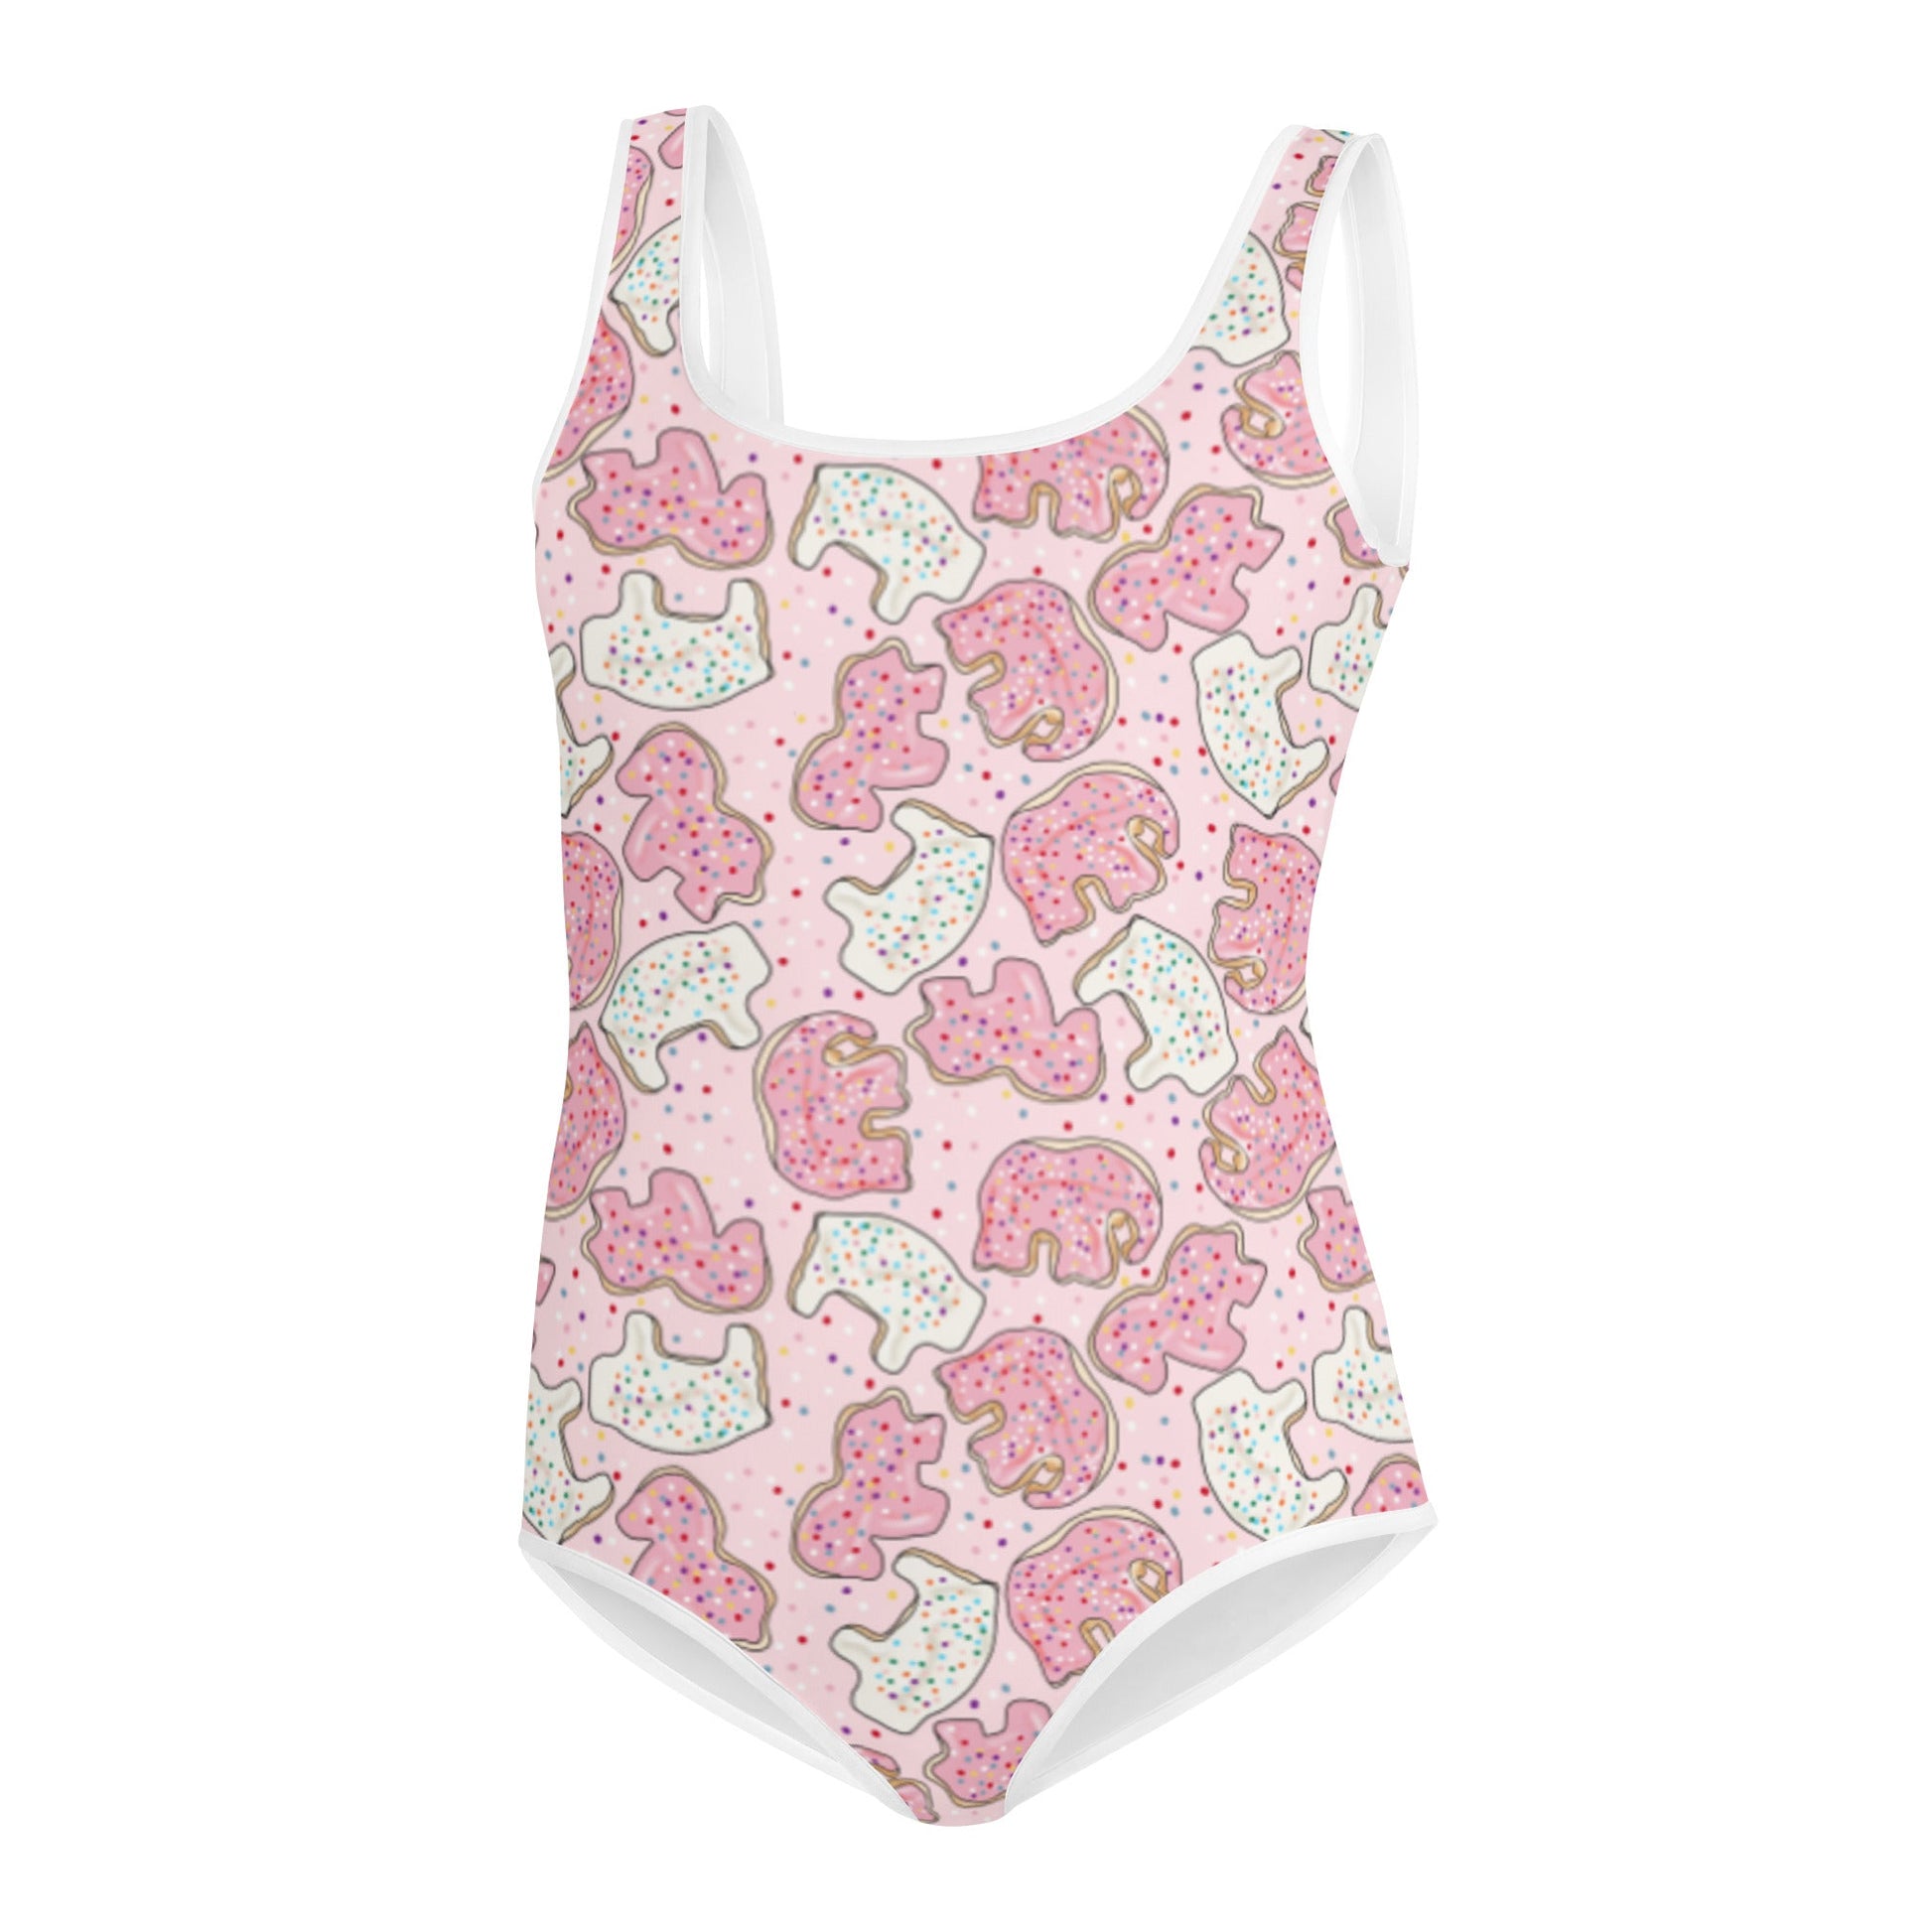 Vintage Cookies All-Over Print Youth Swimsuit happiness is addictiveLittle Lady Shay Boutique